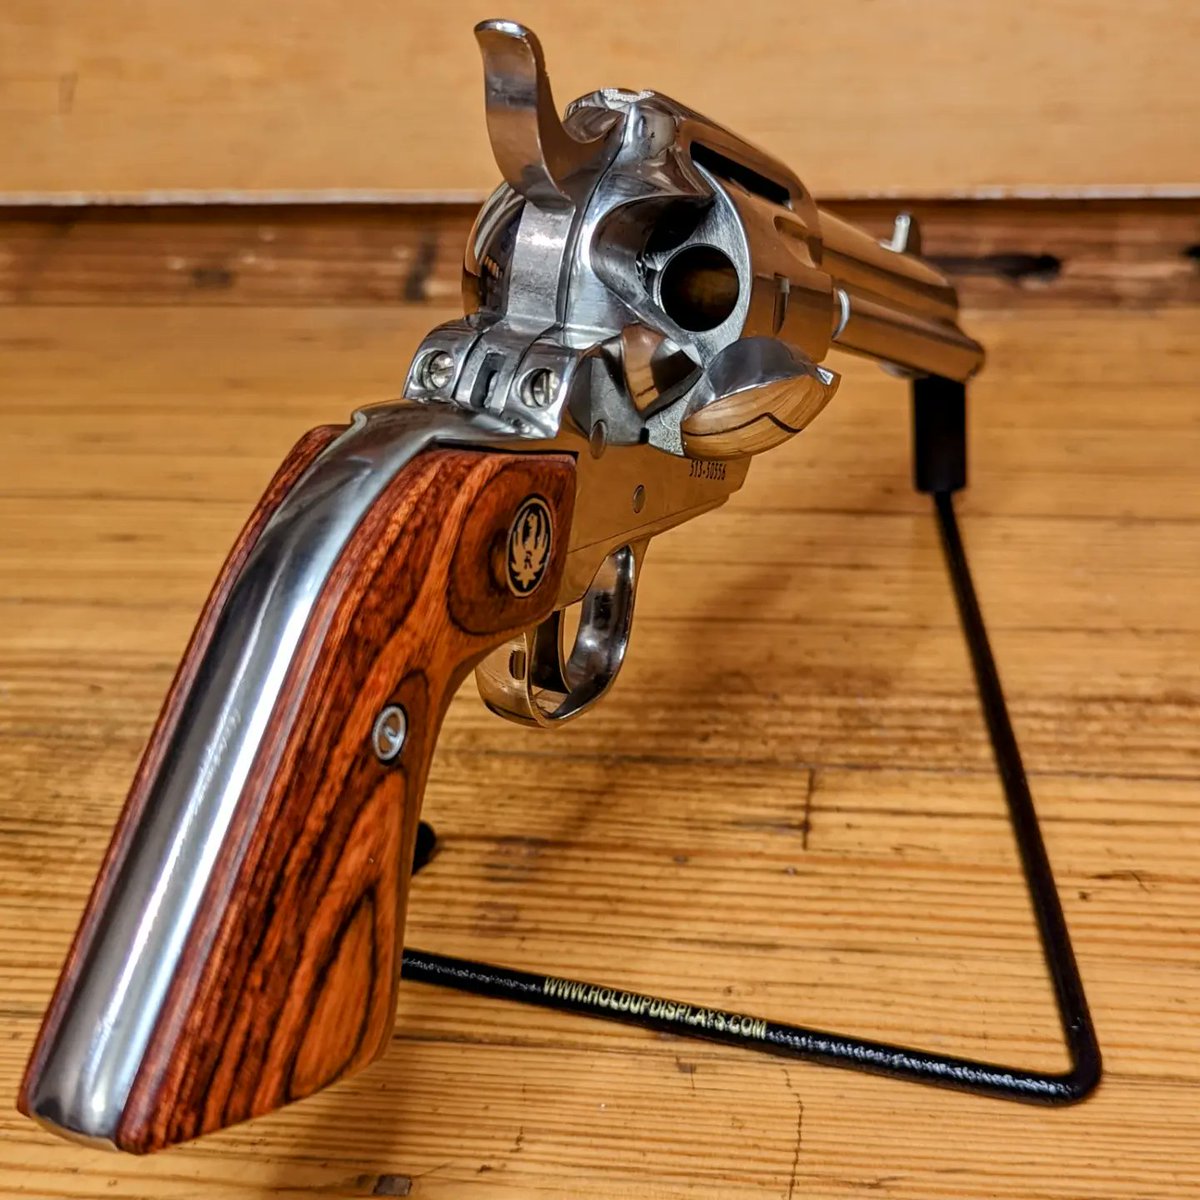 🦄 Yes believe your eyes. 🦄  That is a Brand New in the Box @rugerforum Vaquero 45 Colt High Gloss Stainless Steel w/4.62' Barrel & Hardwood Grips!!! As a Ruger Master Dealer we are able to get our hands on Unicorns like these!
#wheelgunwednesday 
#45colt 
#cowboyactionshooting